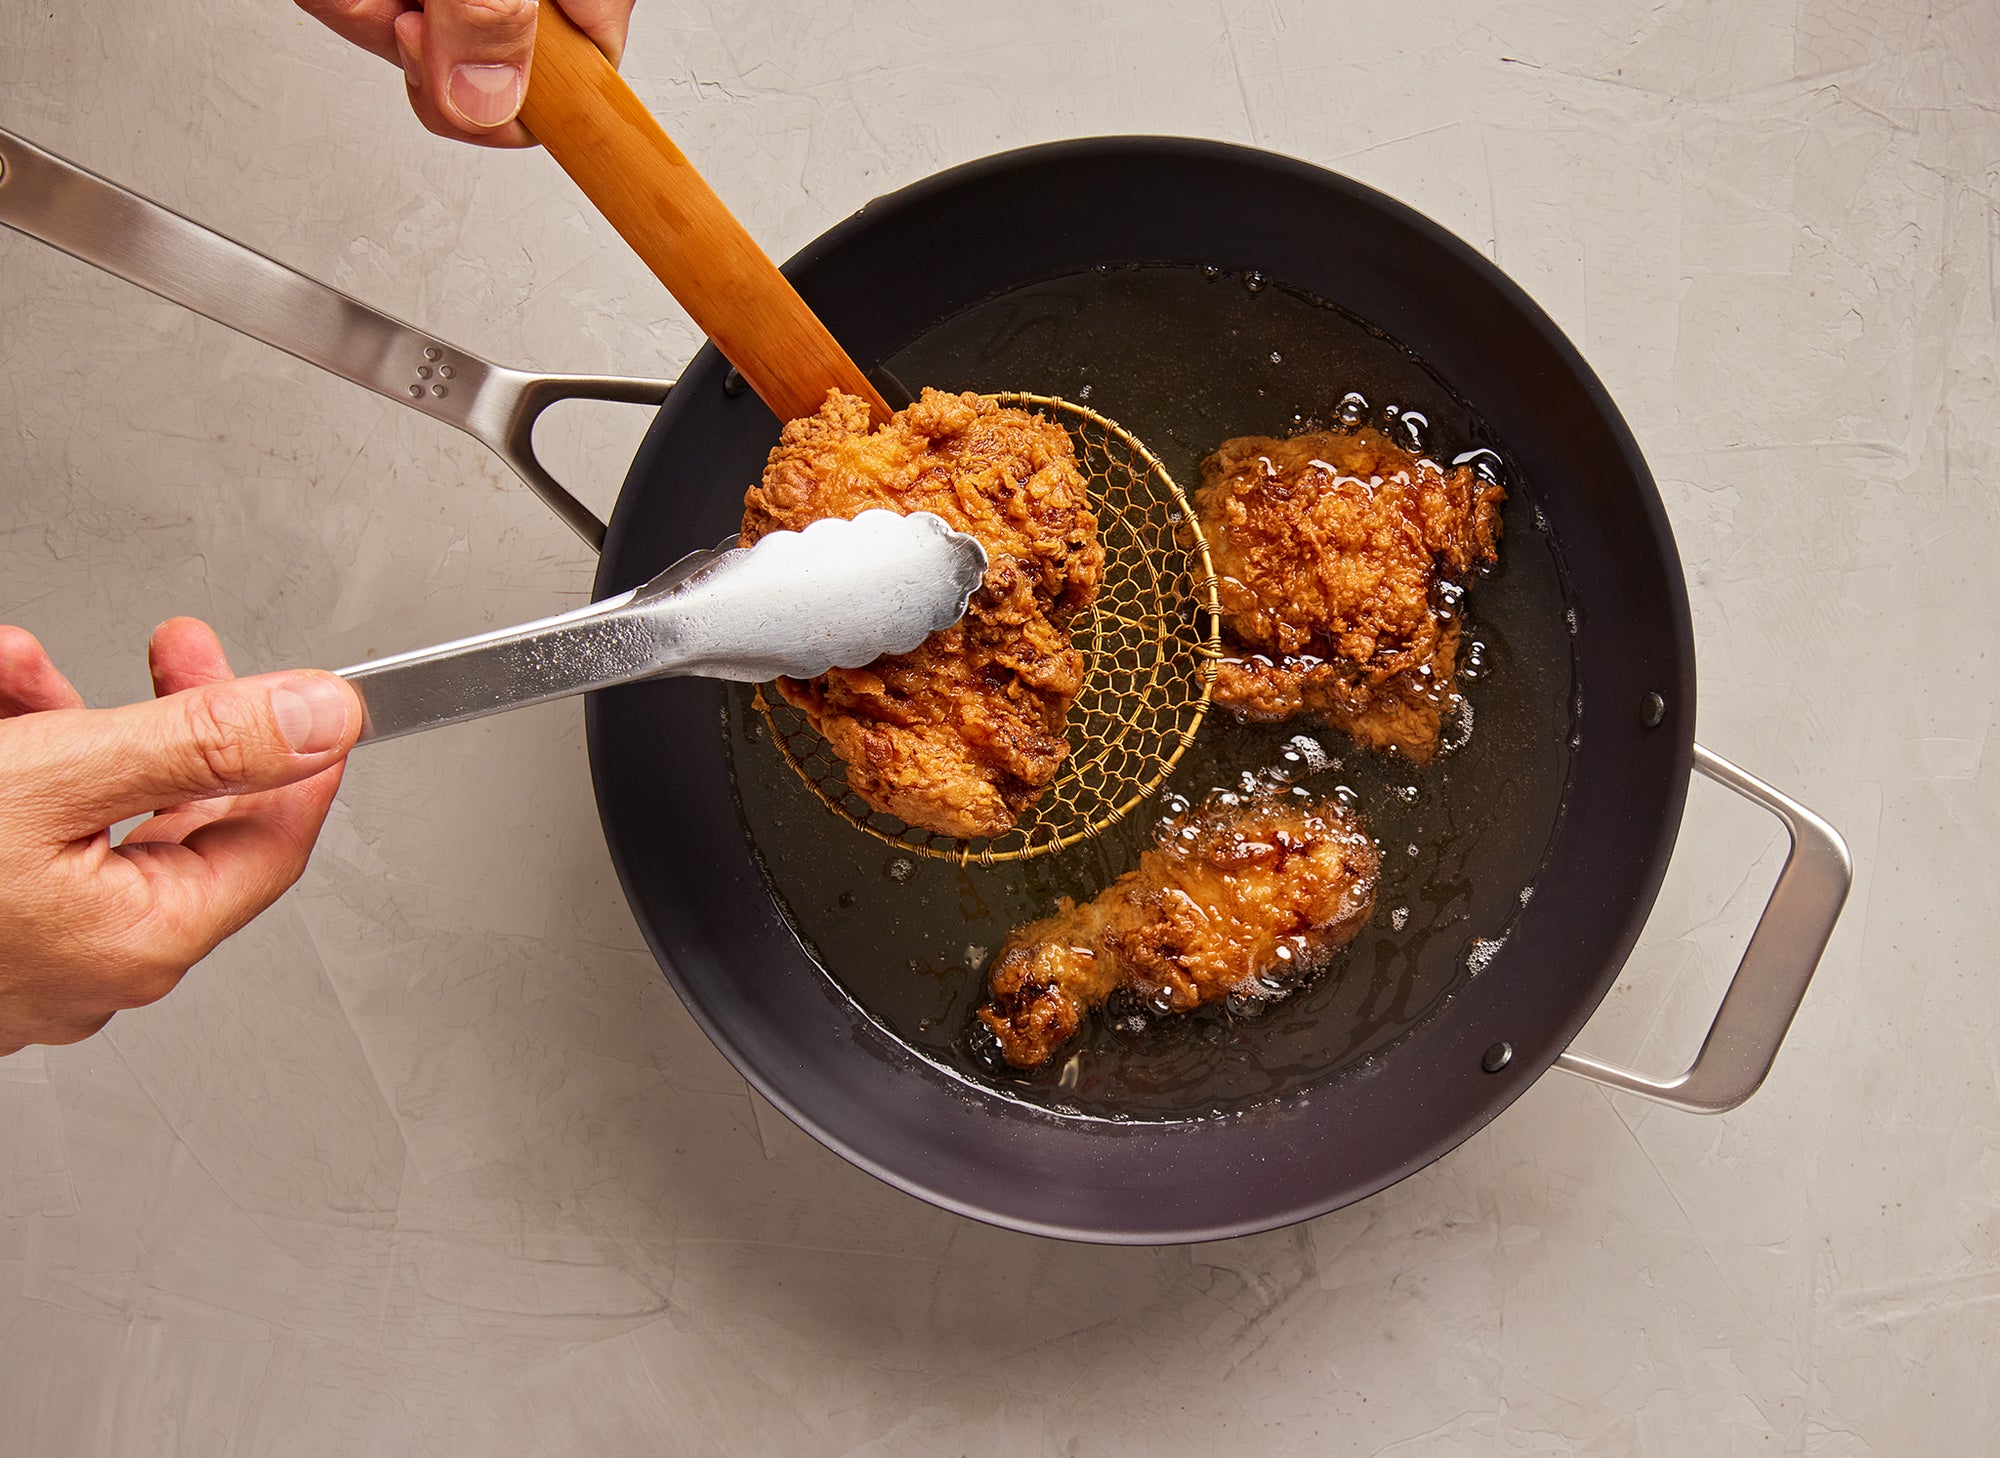 {{12-inch}} A bird’s eye view of a chef pulling a piece of fried chicken out of the Misen Carbon Steel Wok using tongs and a strainer. Additional pieces of chicken can be seen frying in oil in the wok.